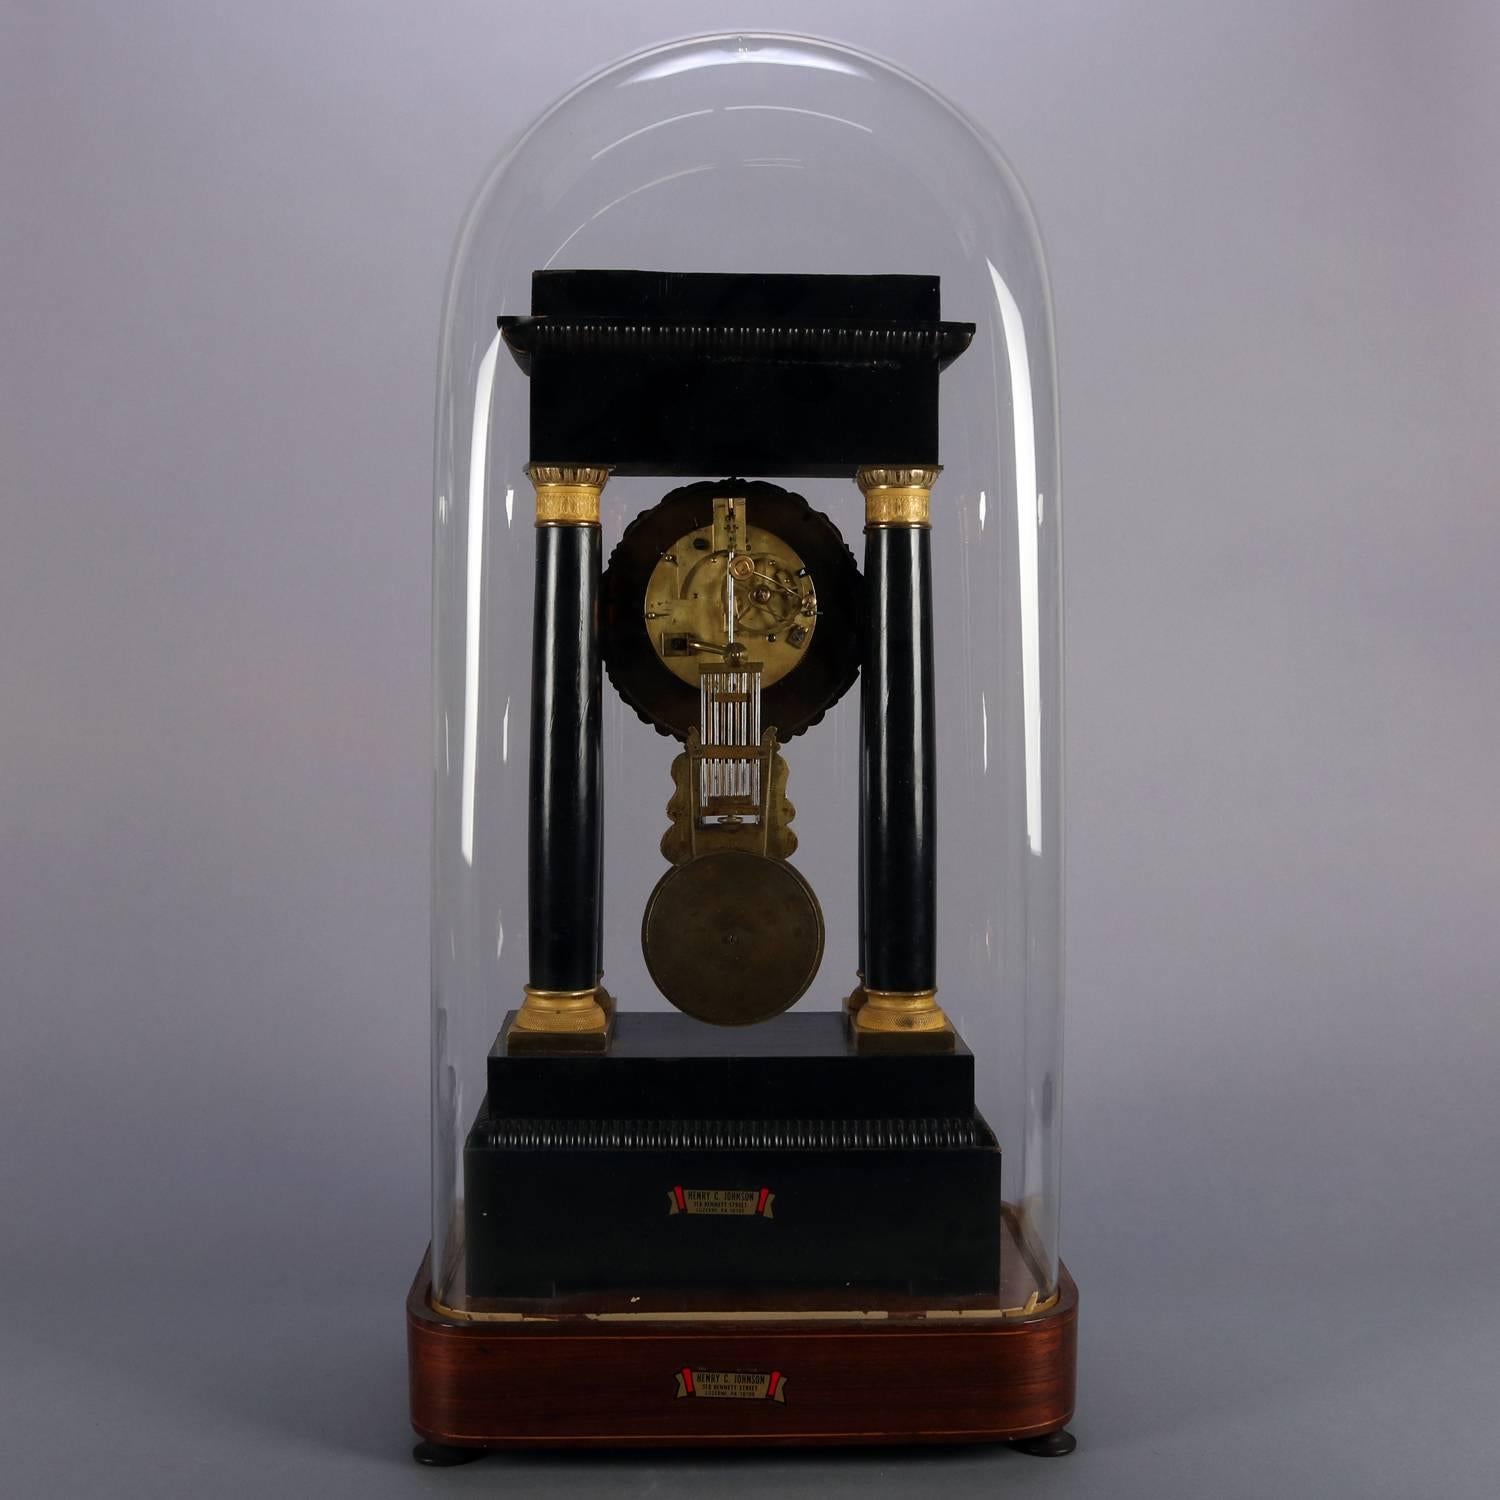 Antique mahogany French Empire portico clock features ebonized and bronze case with mahogany marquetry of satinwood foliate inlay and banding, bronze column capitals and bases, machined dial with Roman numerals, bronze mask pendulum, works signed